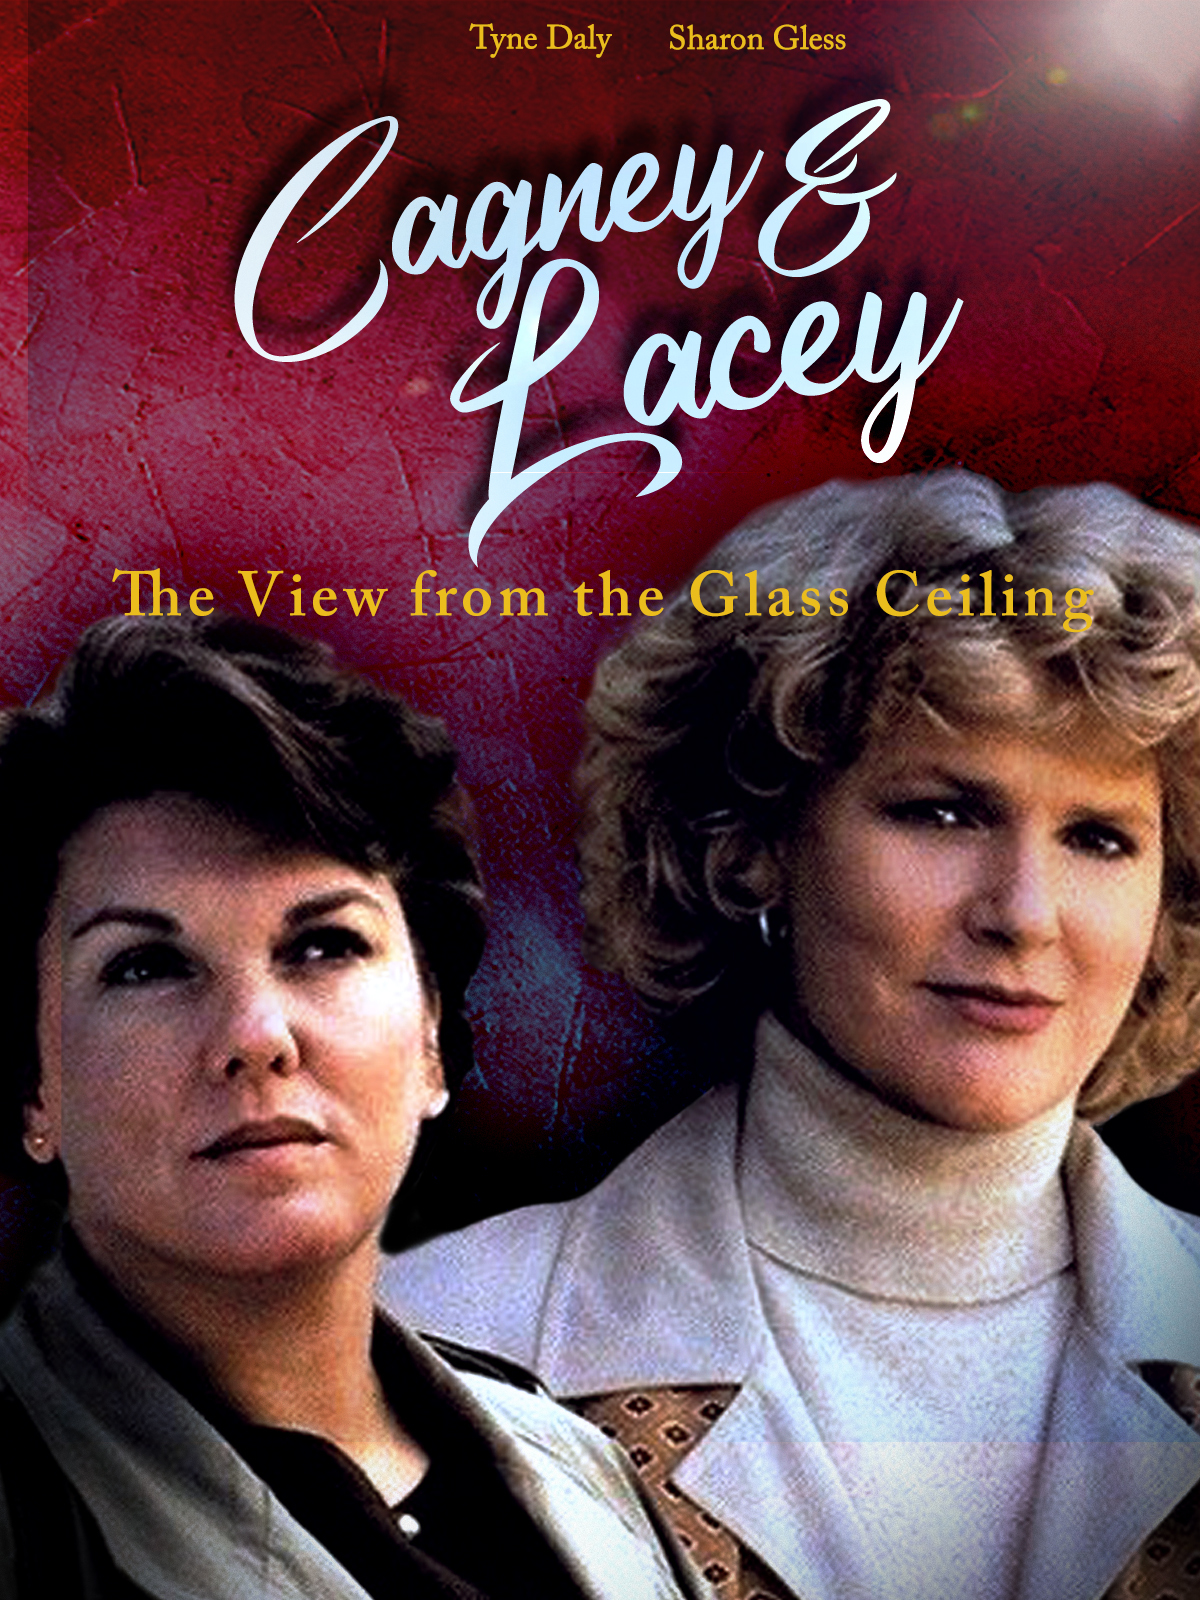 Cagney & Lacey: The View Through the Glass Ceiling